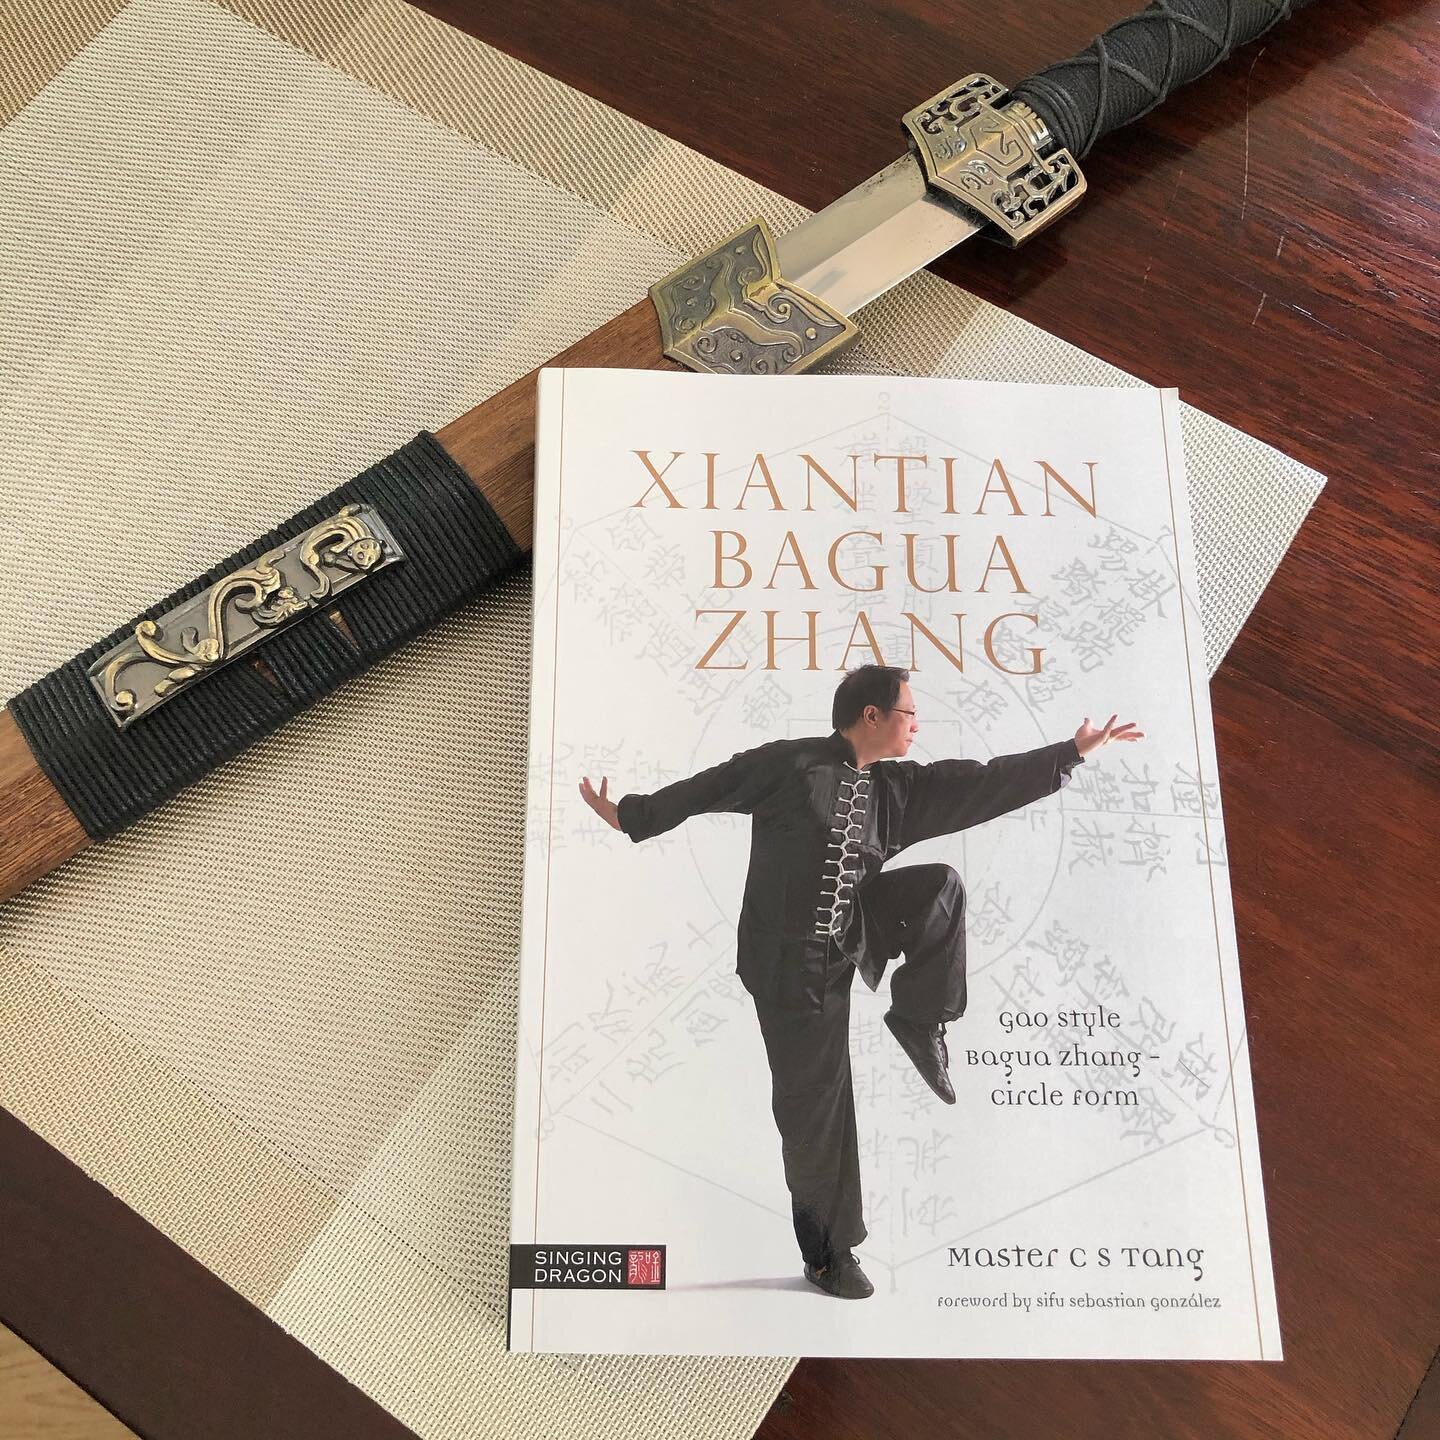 My Sifu&rsquo;s new book published by @singingdragonbooks came out! We have been working on this for many years and although he has put out books on Yiquan and Xingyi, this is his first book on Baguazhang in English and it is what he most famous for.